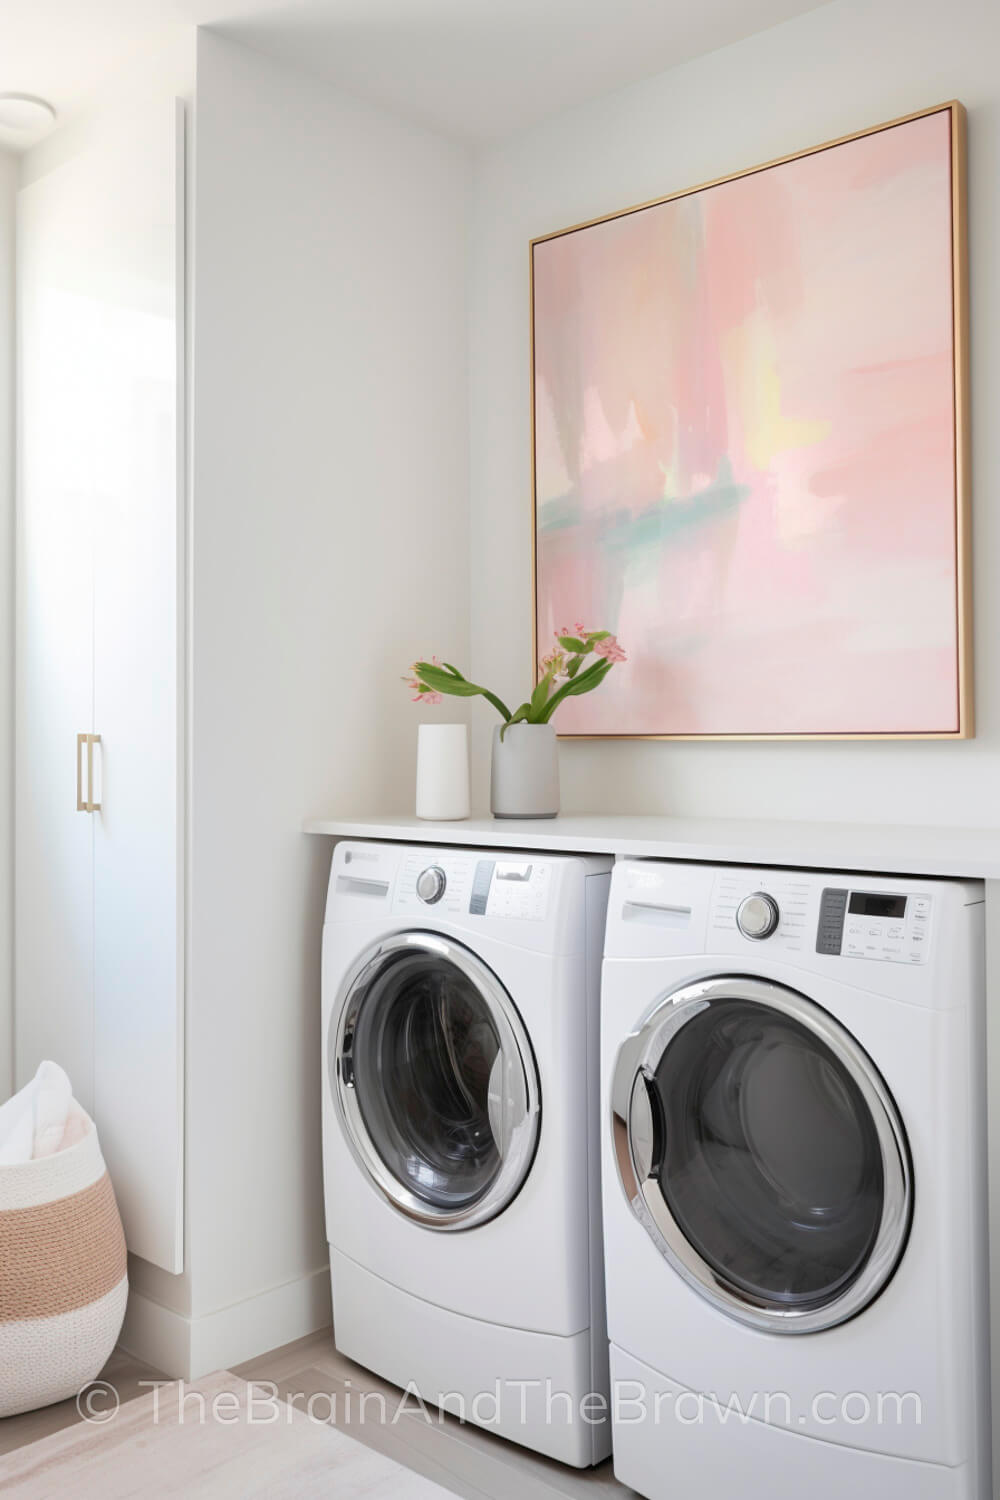 A large piece of laundry room wall decor hangs above a washer and dryer. A plant sits on the washer and dryer. Modern laundry room decor ideas